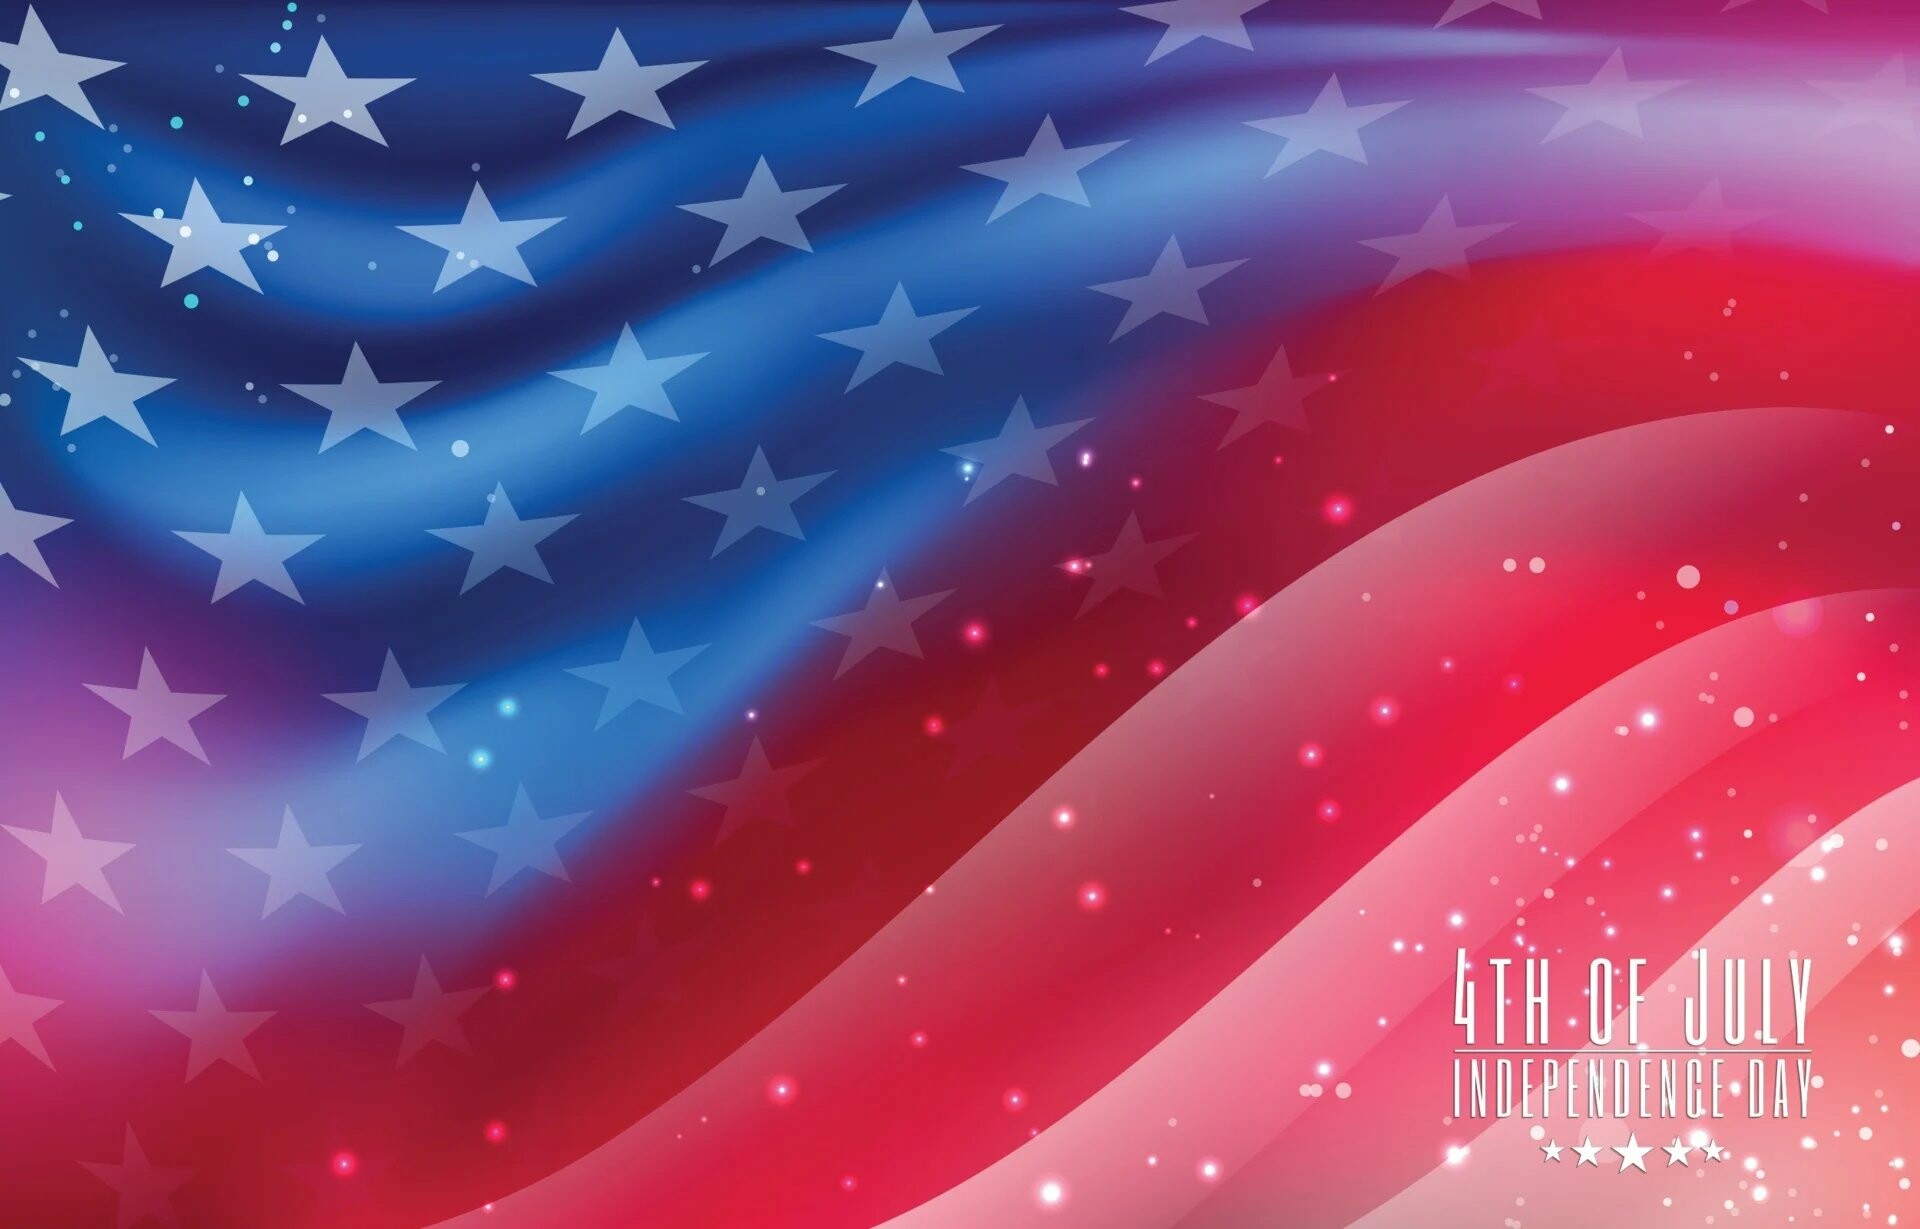 Independence Day (USA): 4th of July, The historic date in 1776 when the Declaration of Independence was approved. 1920x1230 HD Background.